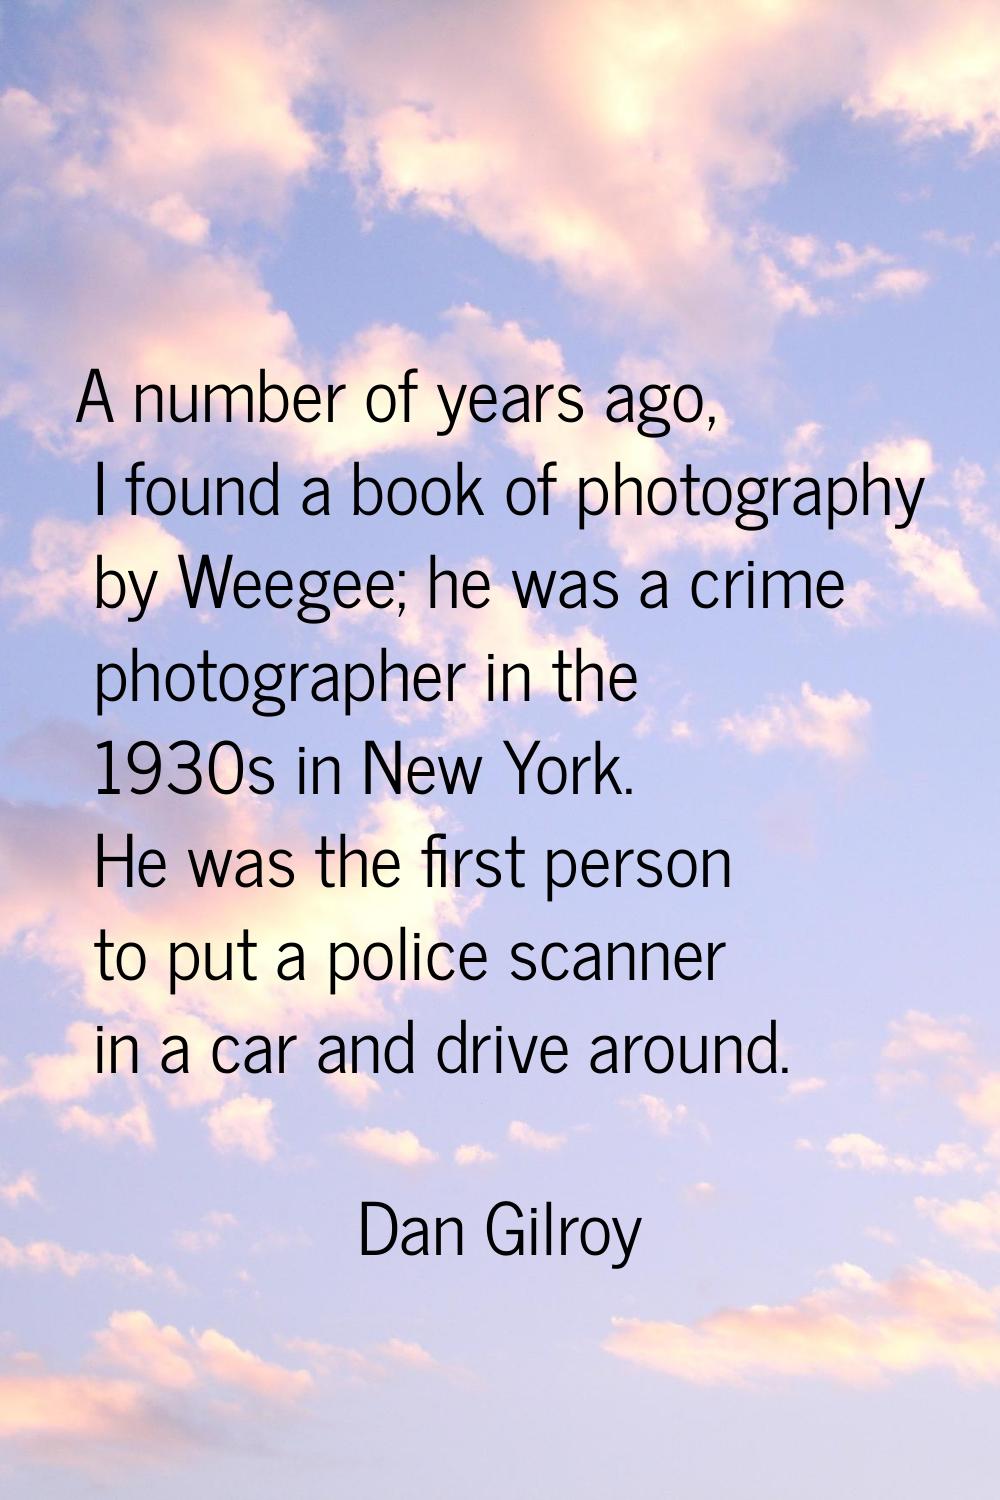 A number of years ago, I found a book of photography by Weegee; he was a crime photographer in the 